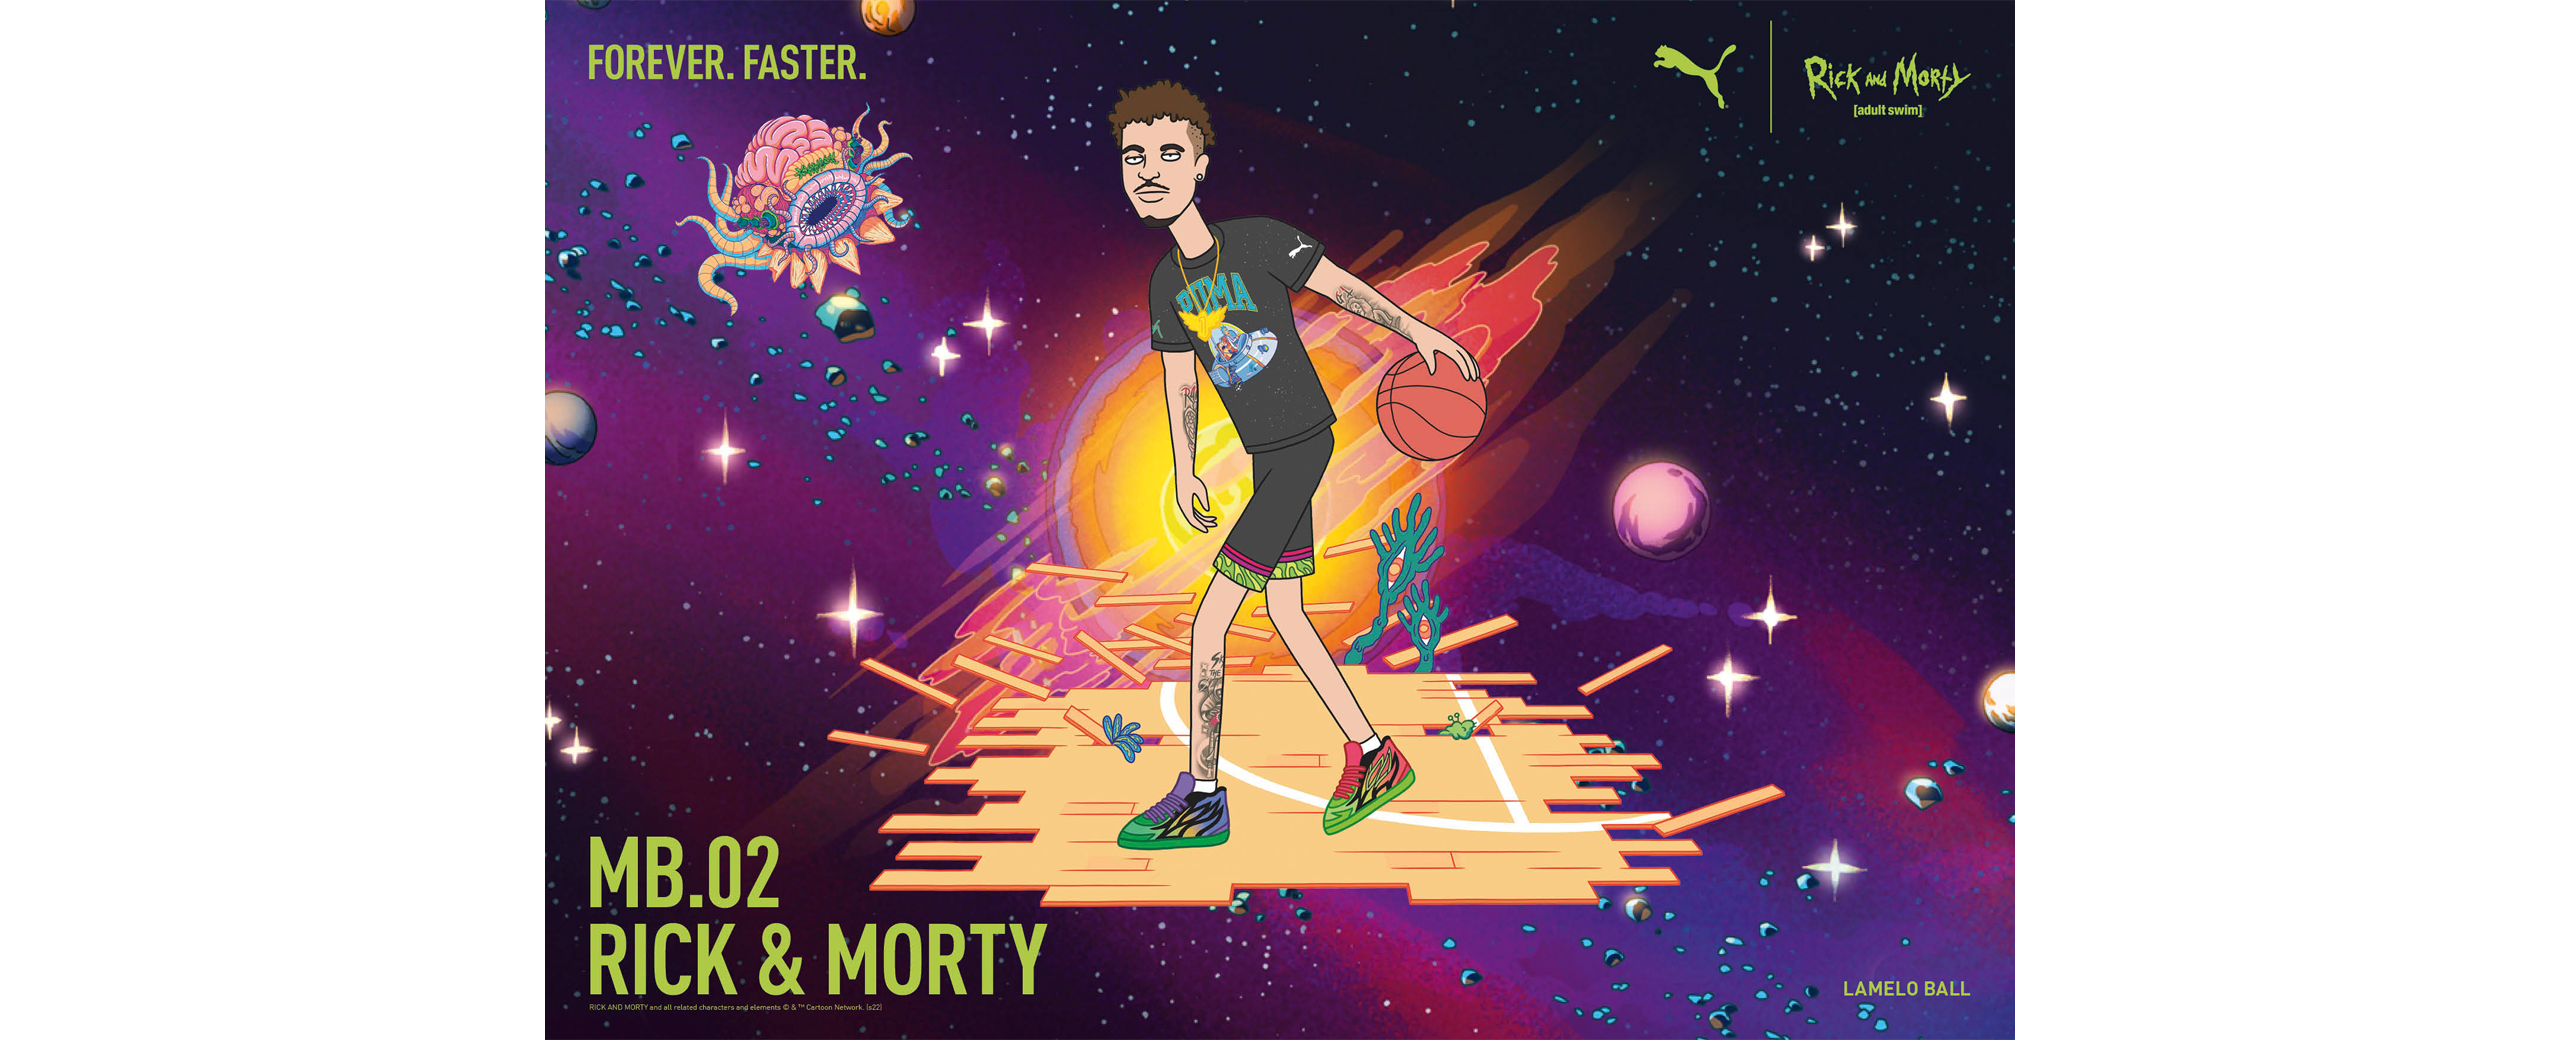 "PUMA x RICK AND MORTY LaMelo Ball MB.02"